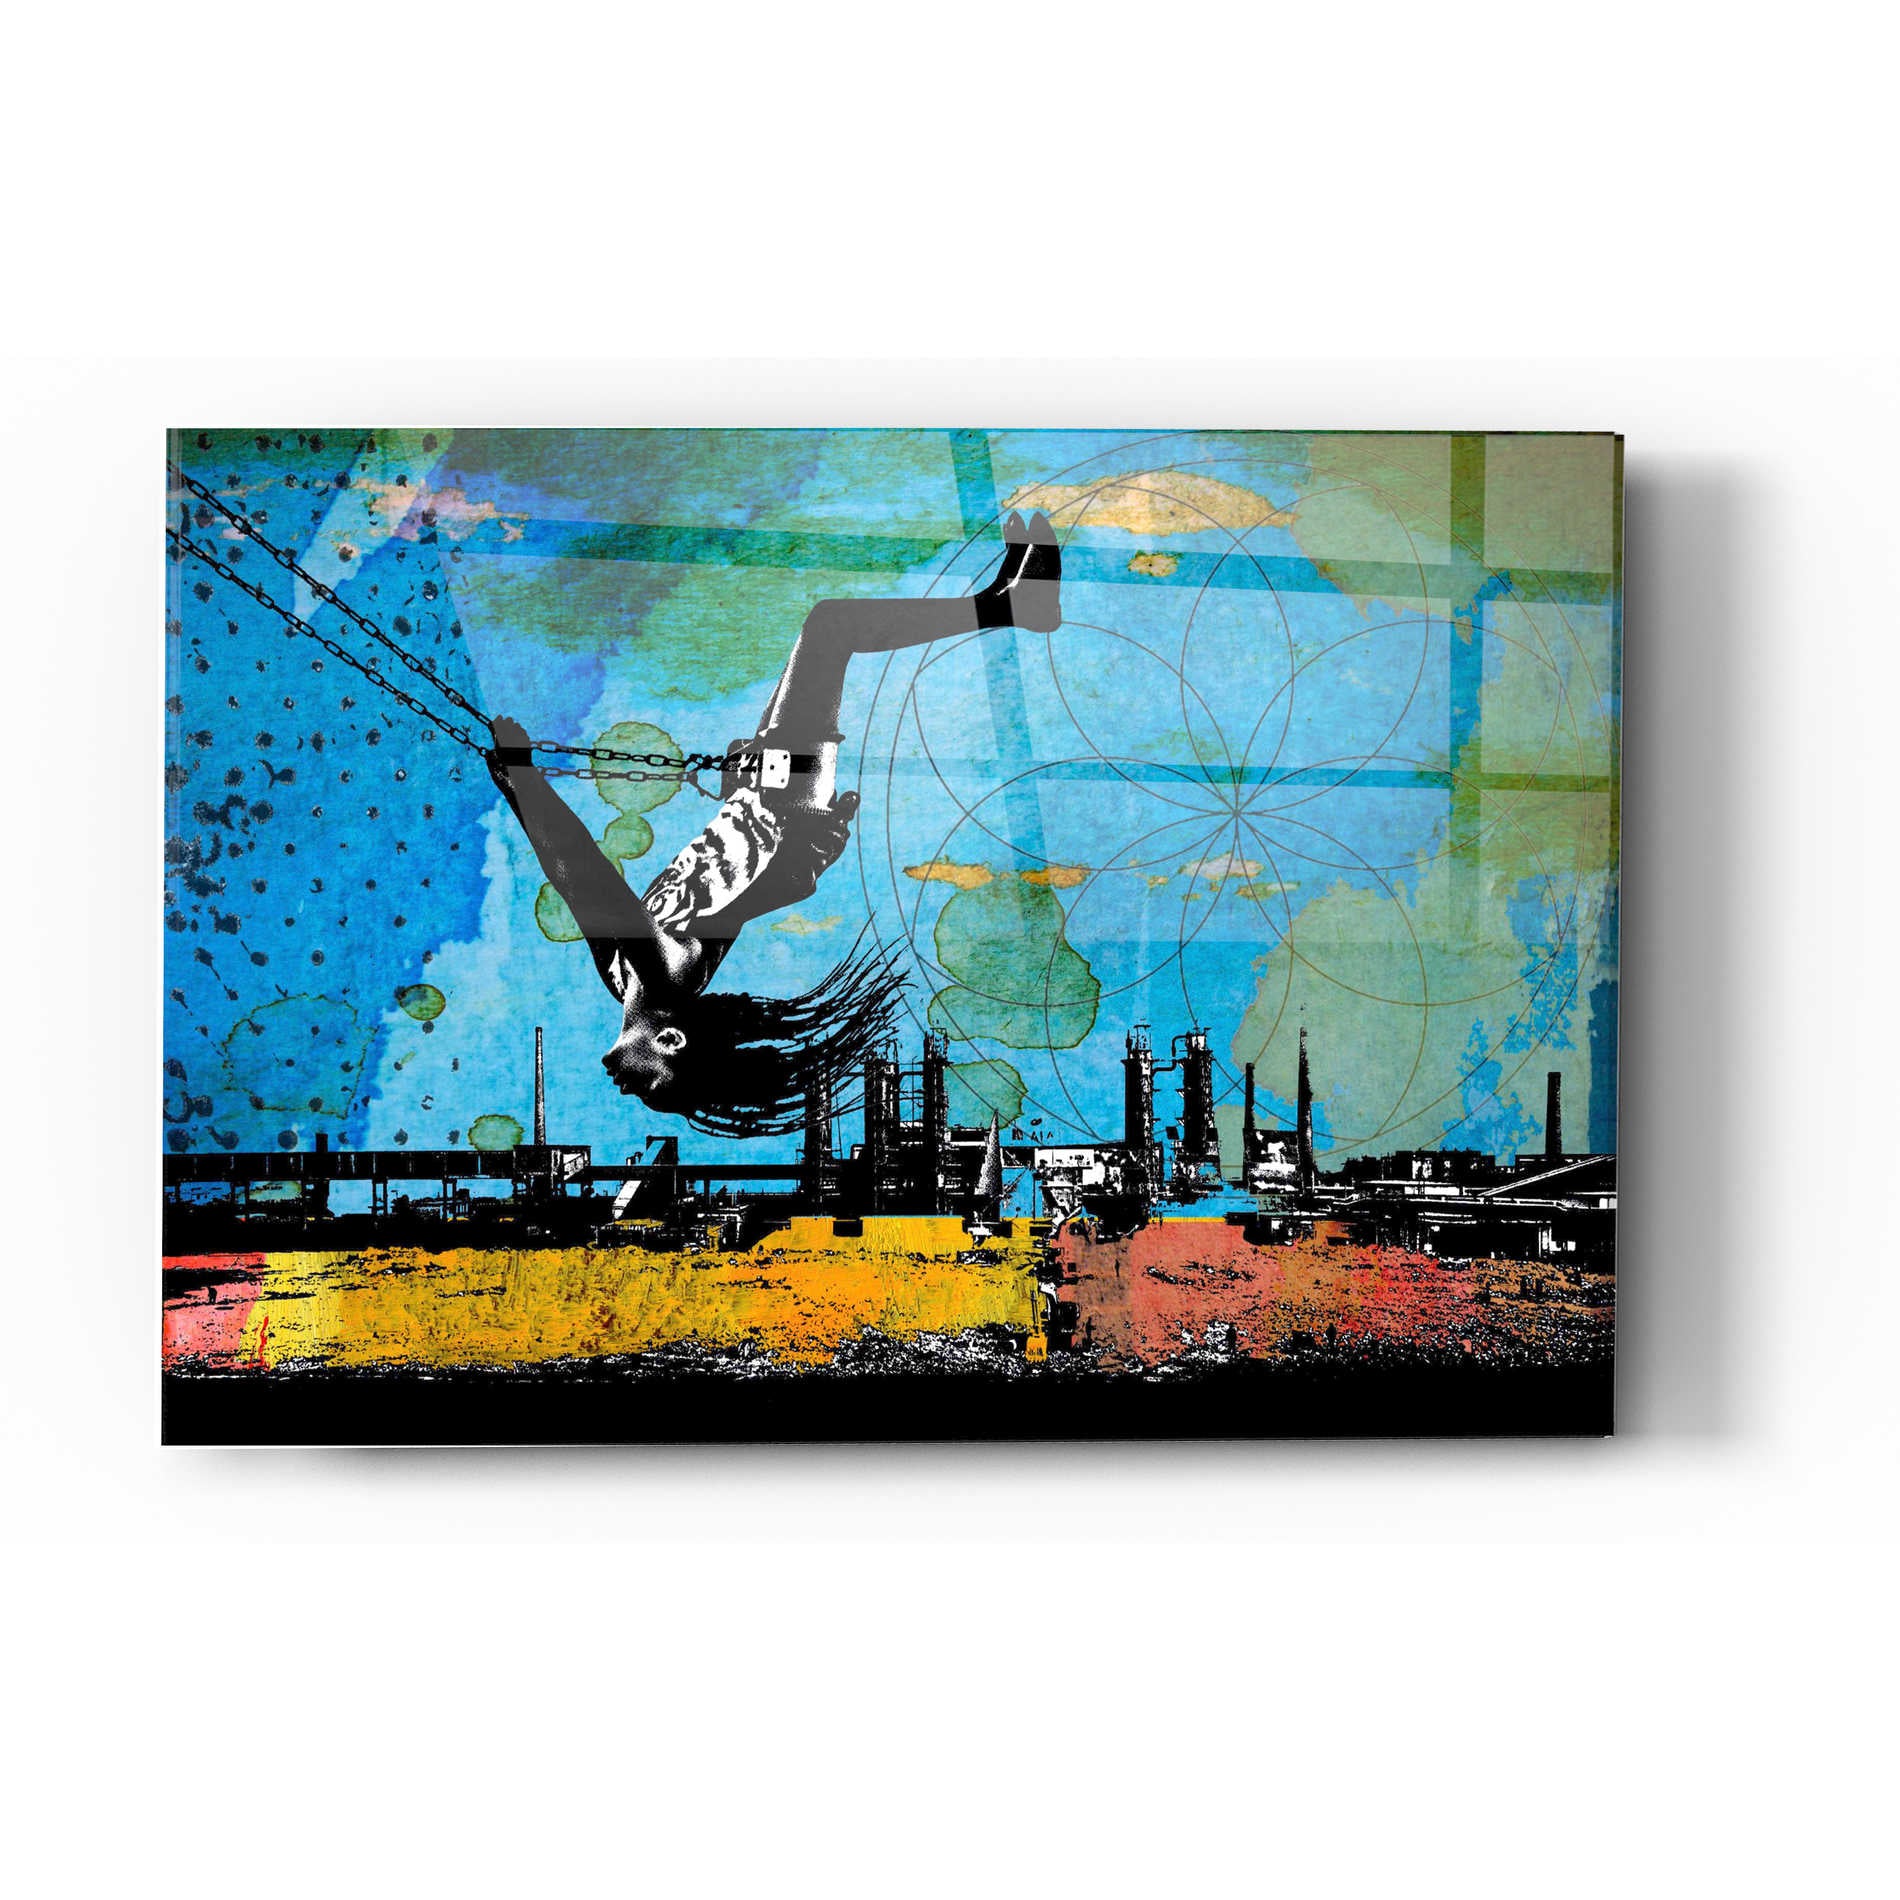 Epic Art 'ON TOP OF THE WORLD' by DB Waterman, Acrylic Glass Wall Art,16x24